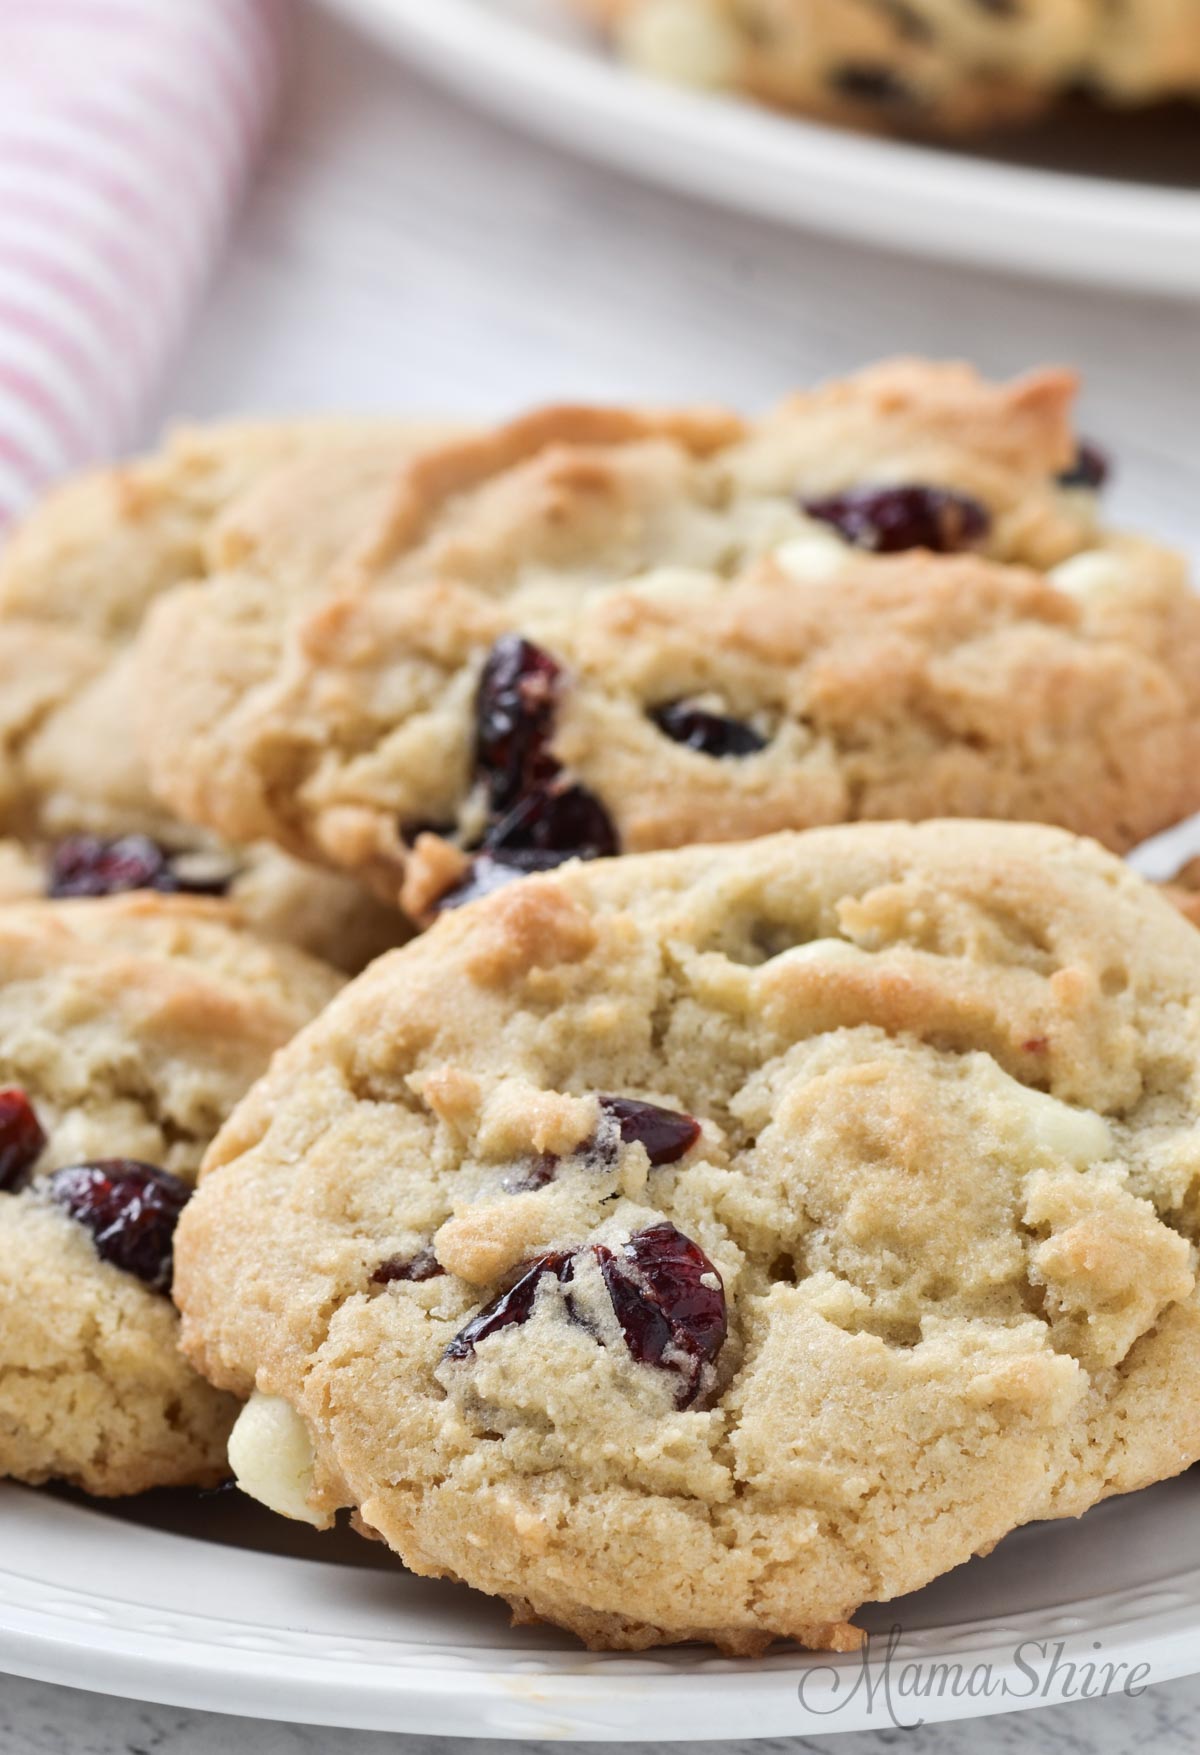 A close-up of a white chocolate cranberry cookie made gluten-free and dairy-free.